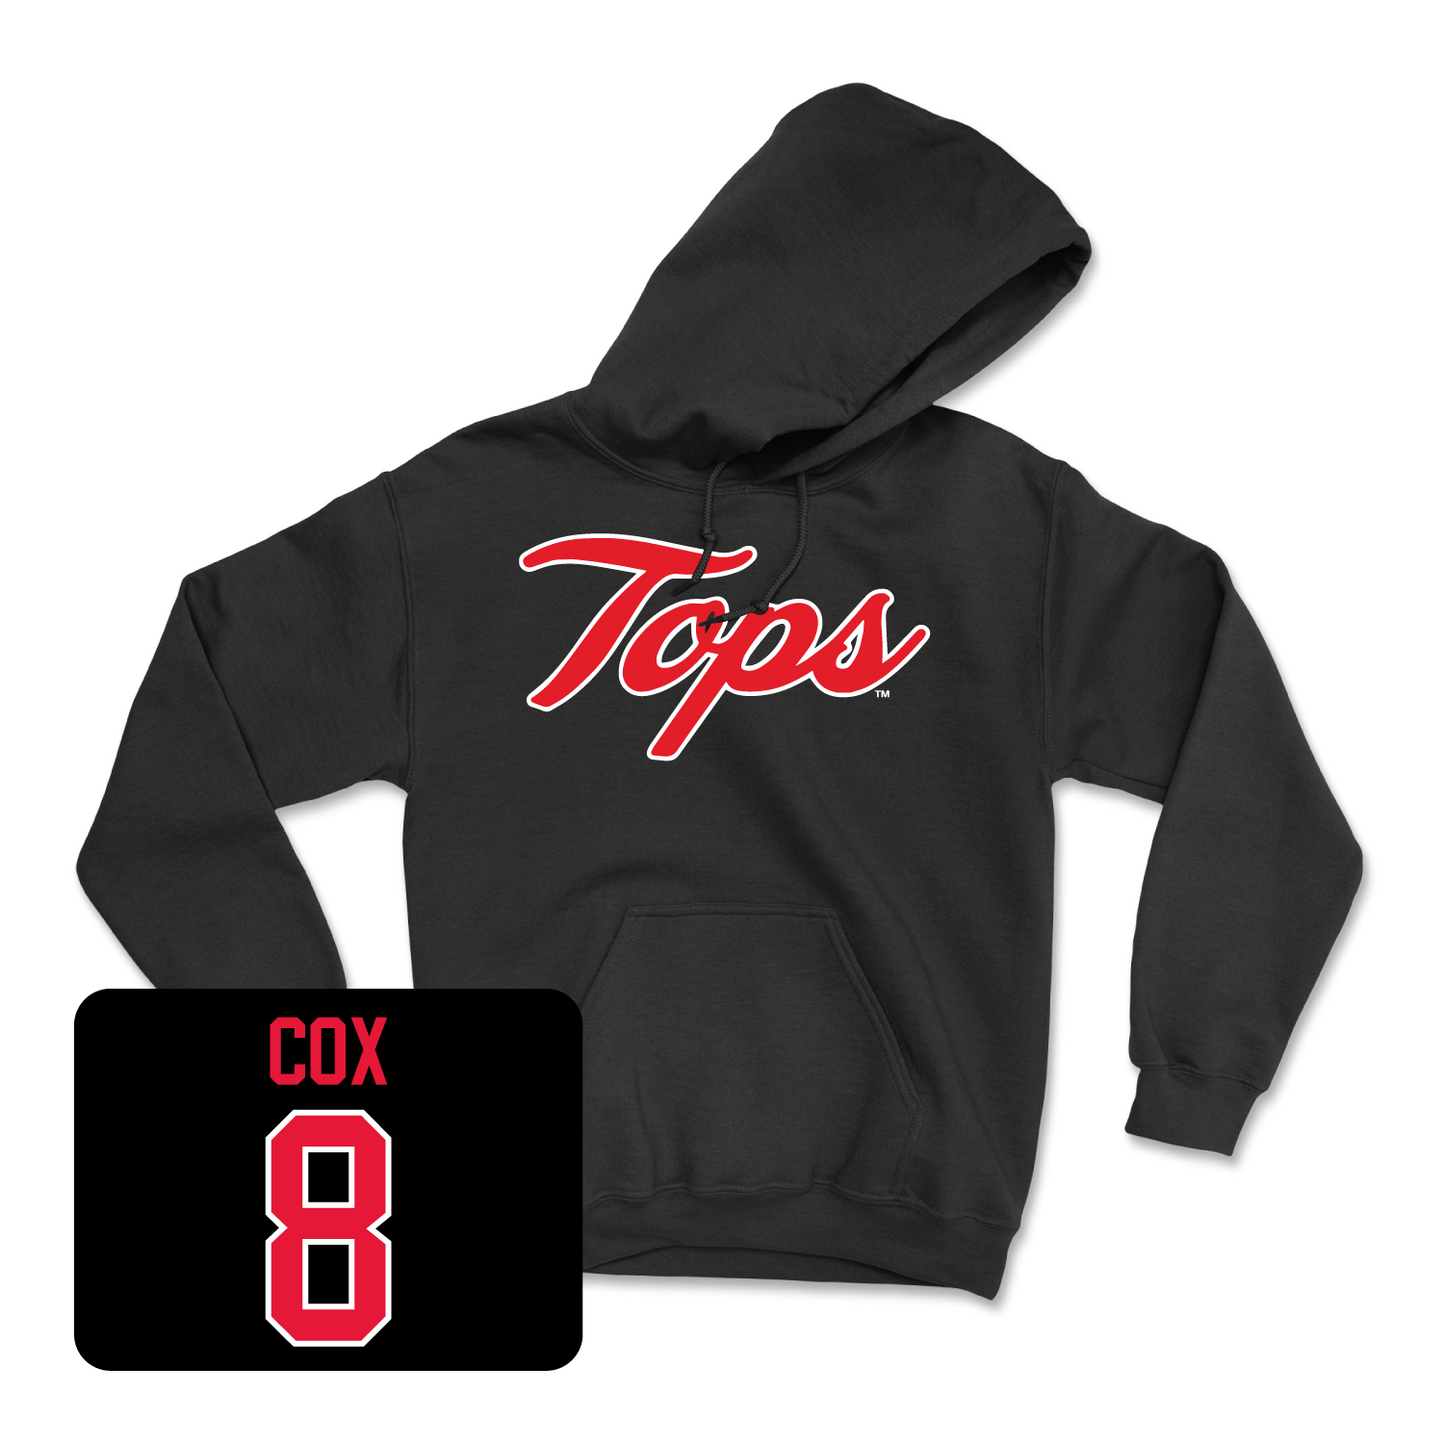 Black Women's Volleyball Tops Hoodie Youth Large / Kaylee Cox | #8